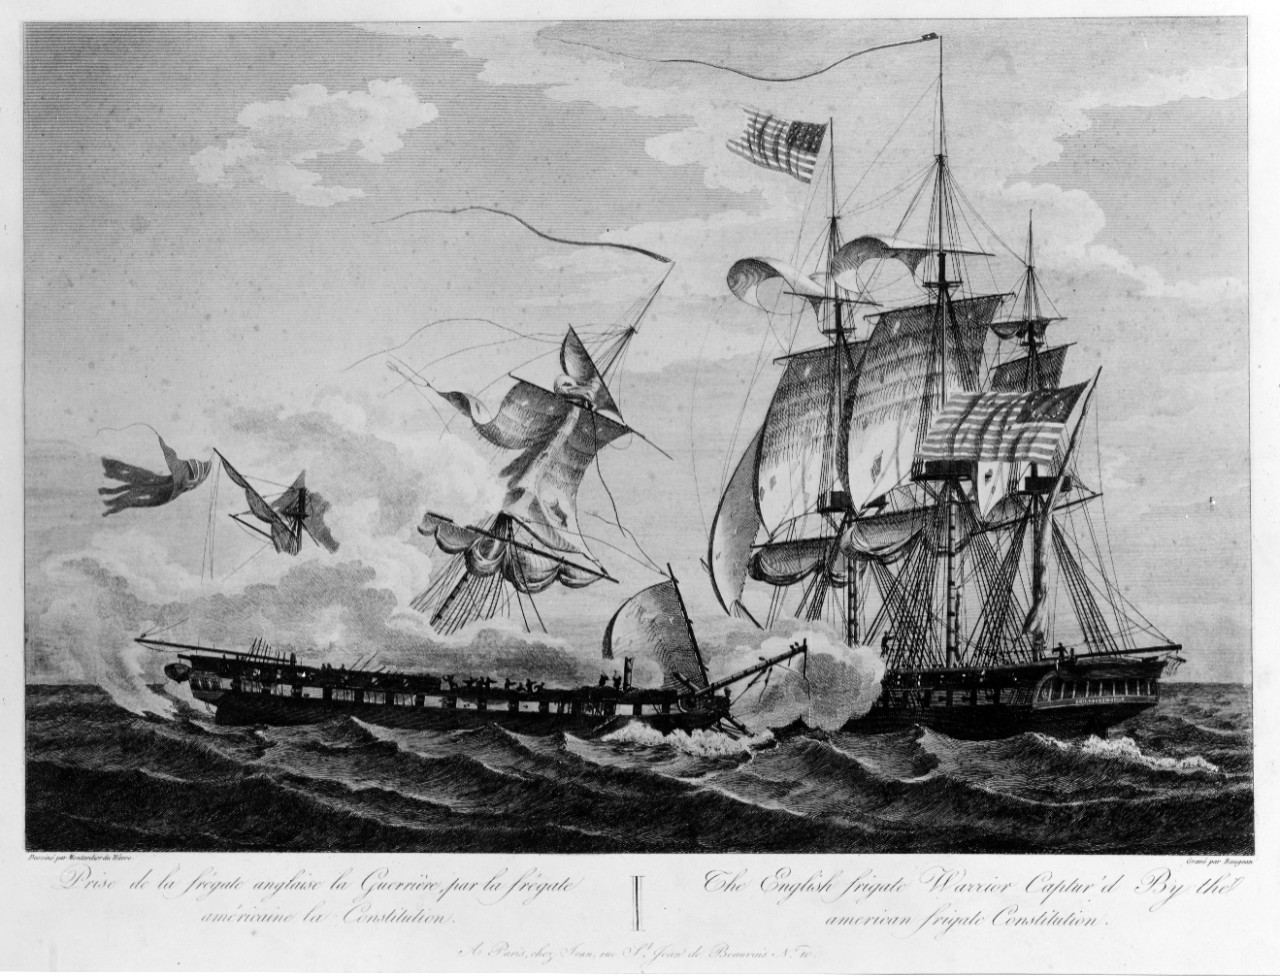 Photo #: NH 42065  Action between USS Constitution and HMS Guerriere, 19 August 1812